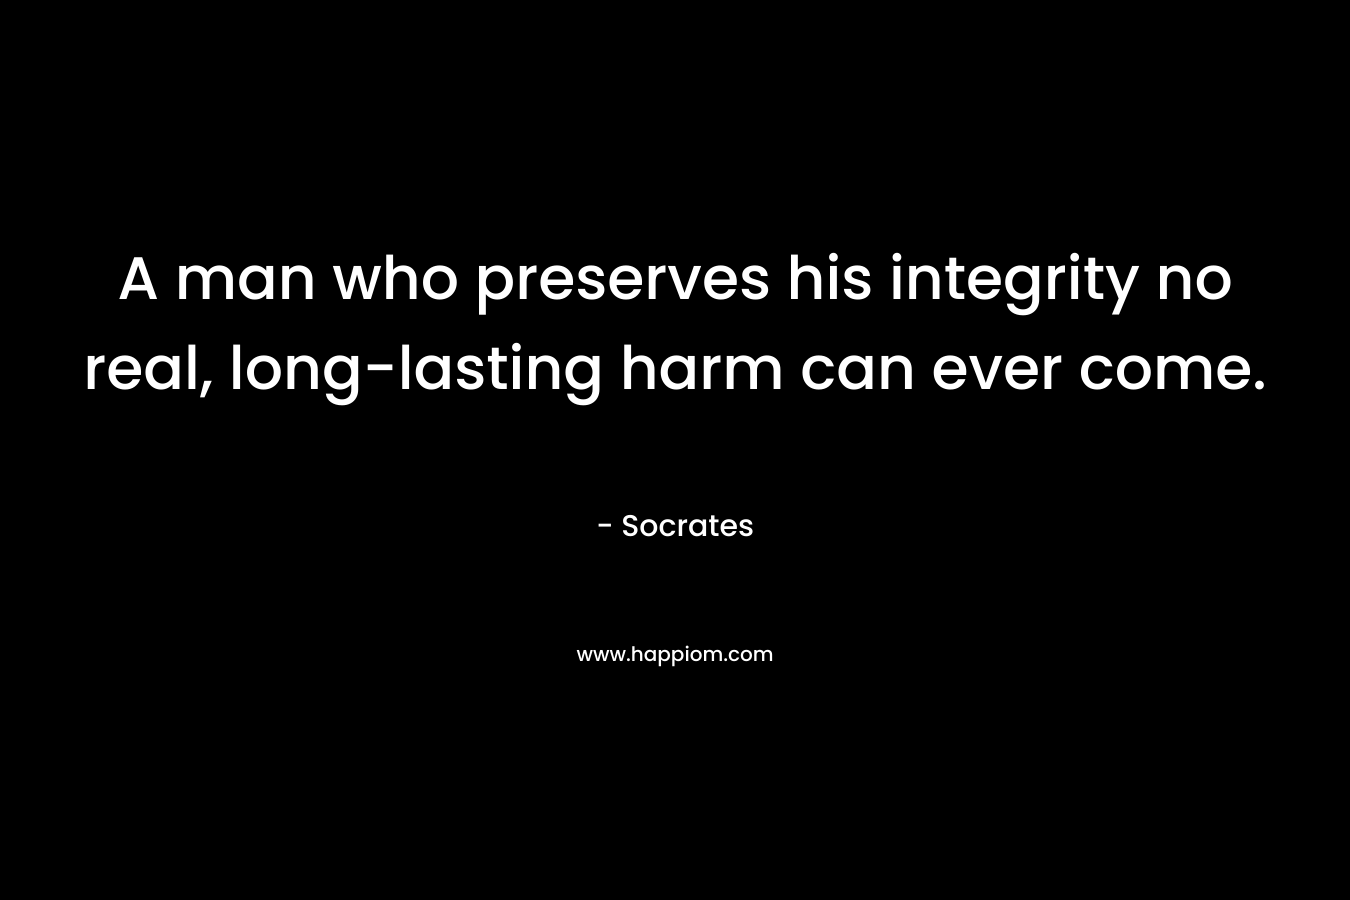 A man who preserves his integrity no real, long-lasting harm can ever come.